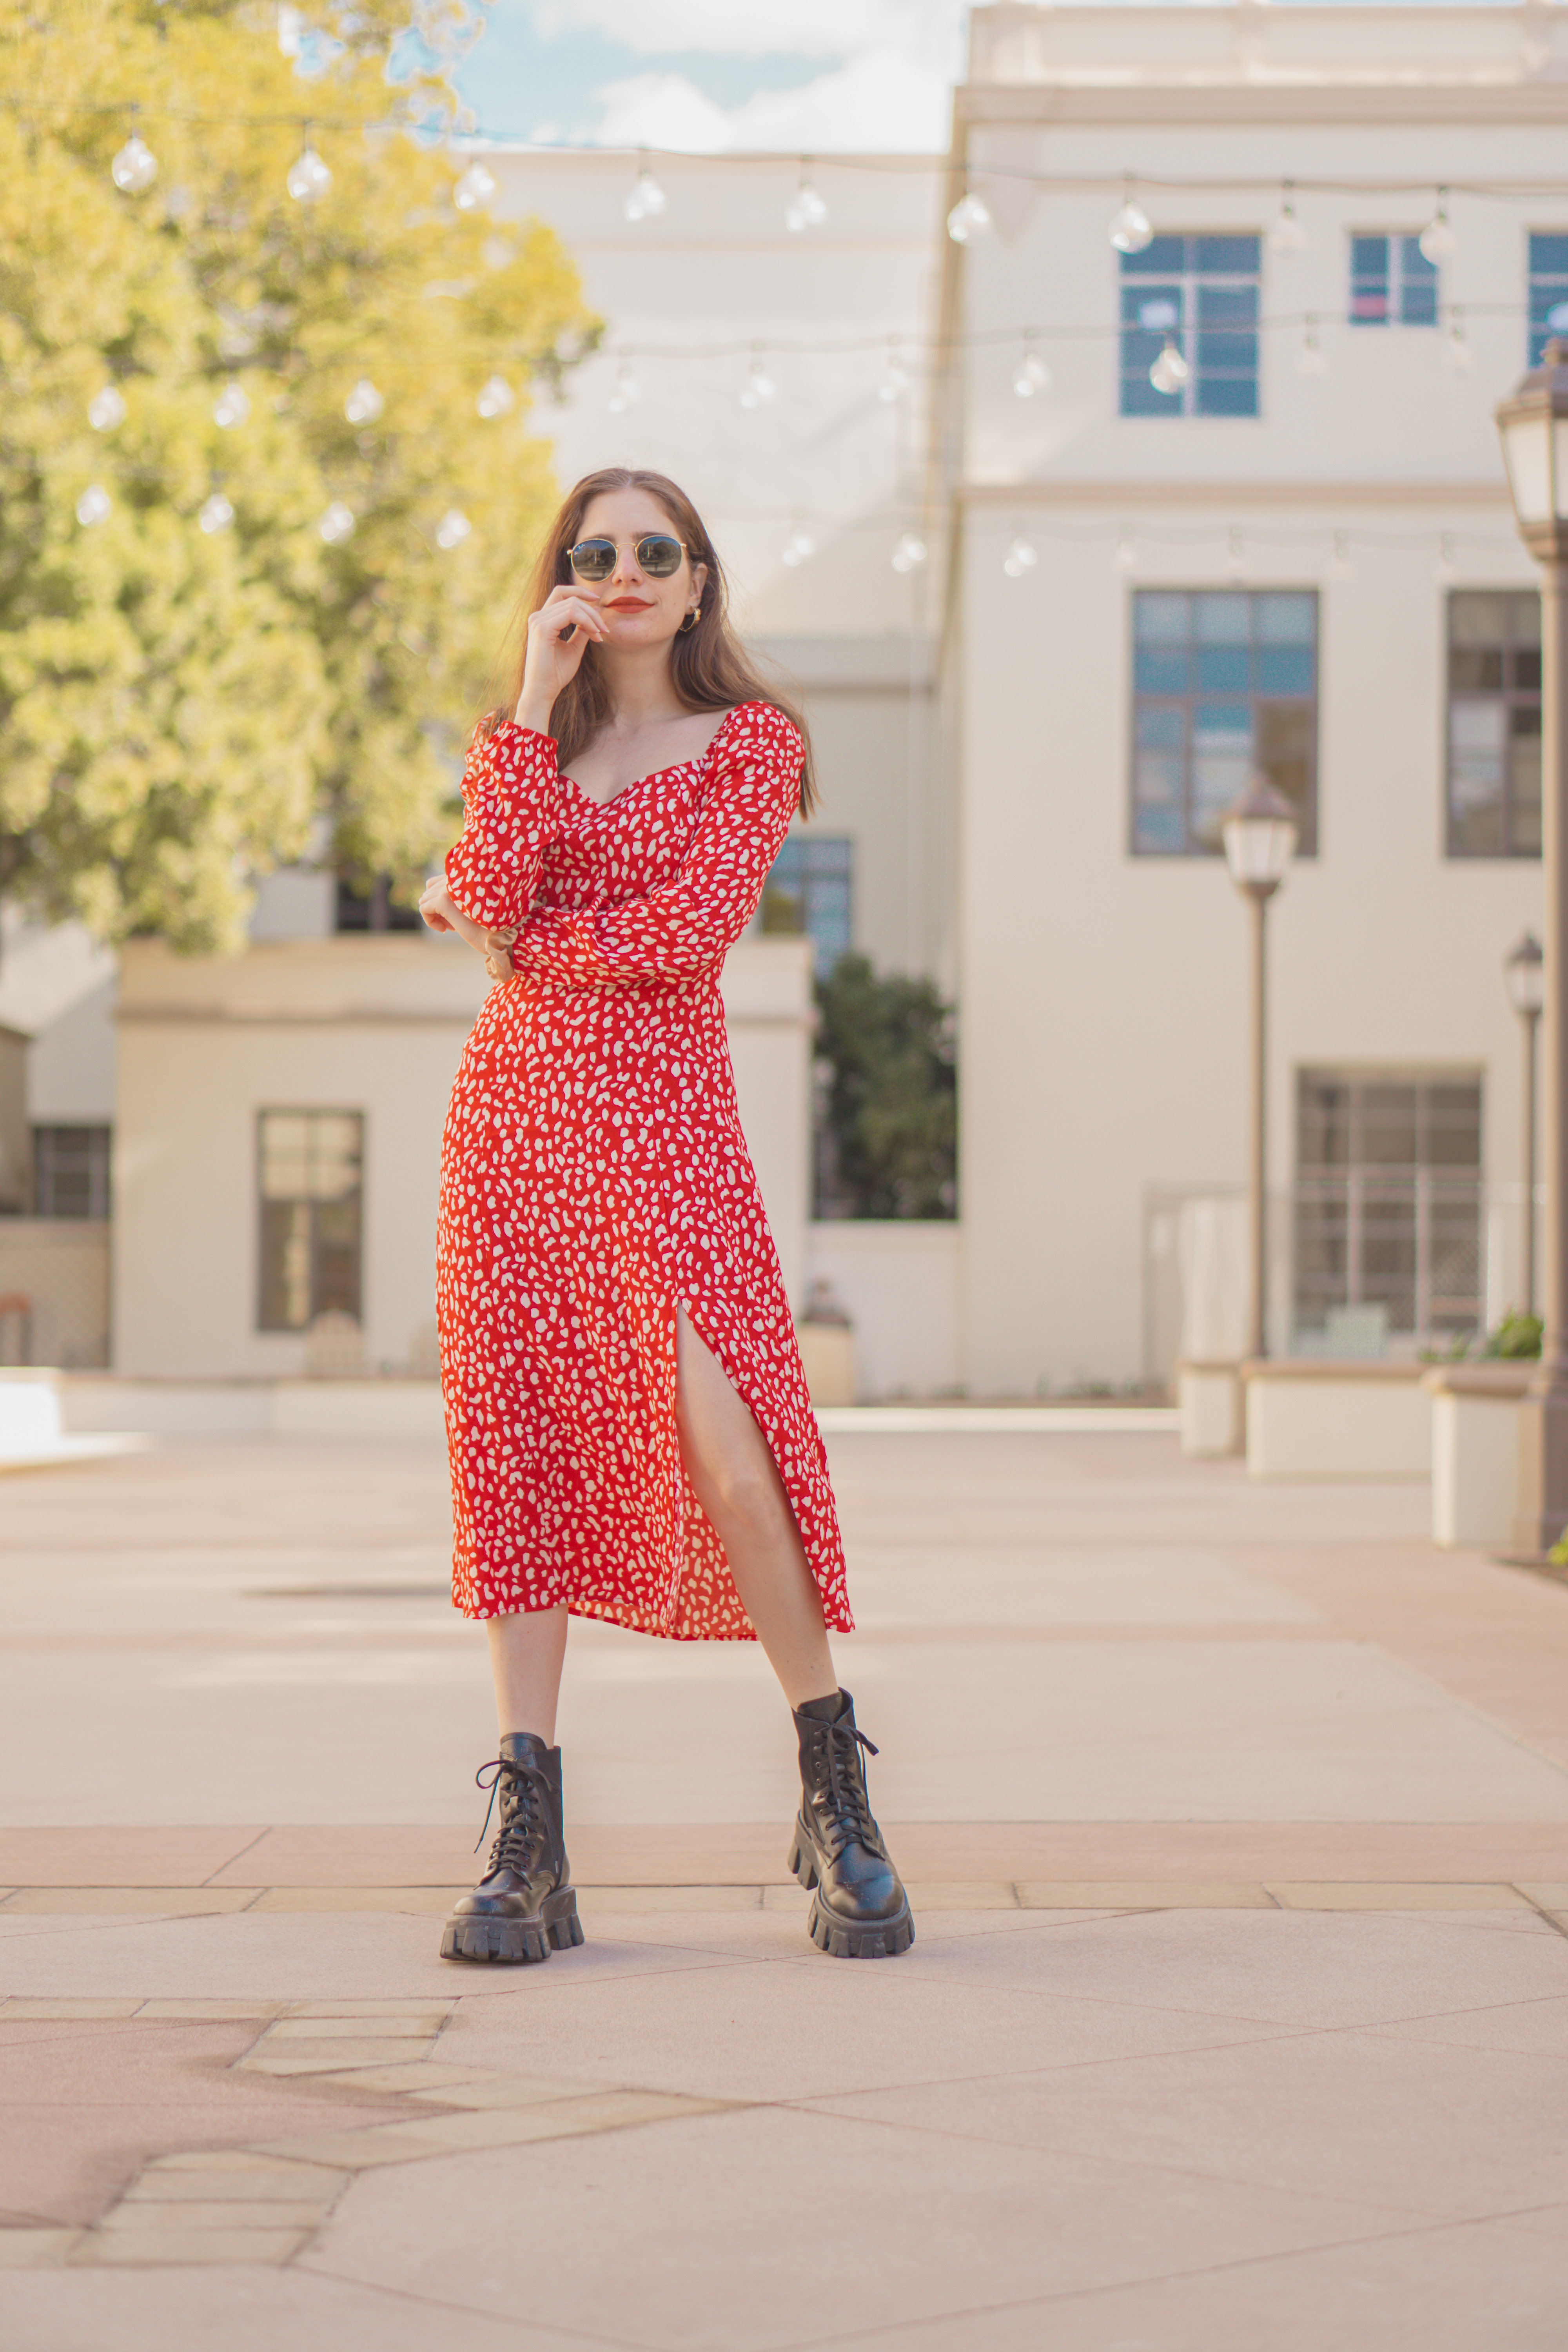 Valentine's Day Outfit Ideas for Women - Sweatheart neckline, slit dress with red and white polka dot pattern, combat boots outfit, how to style combat boots blogger outfit, blogger style